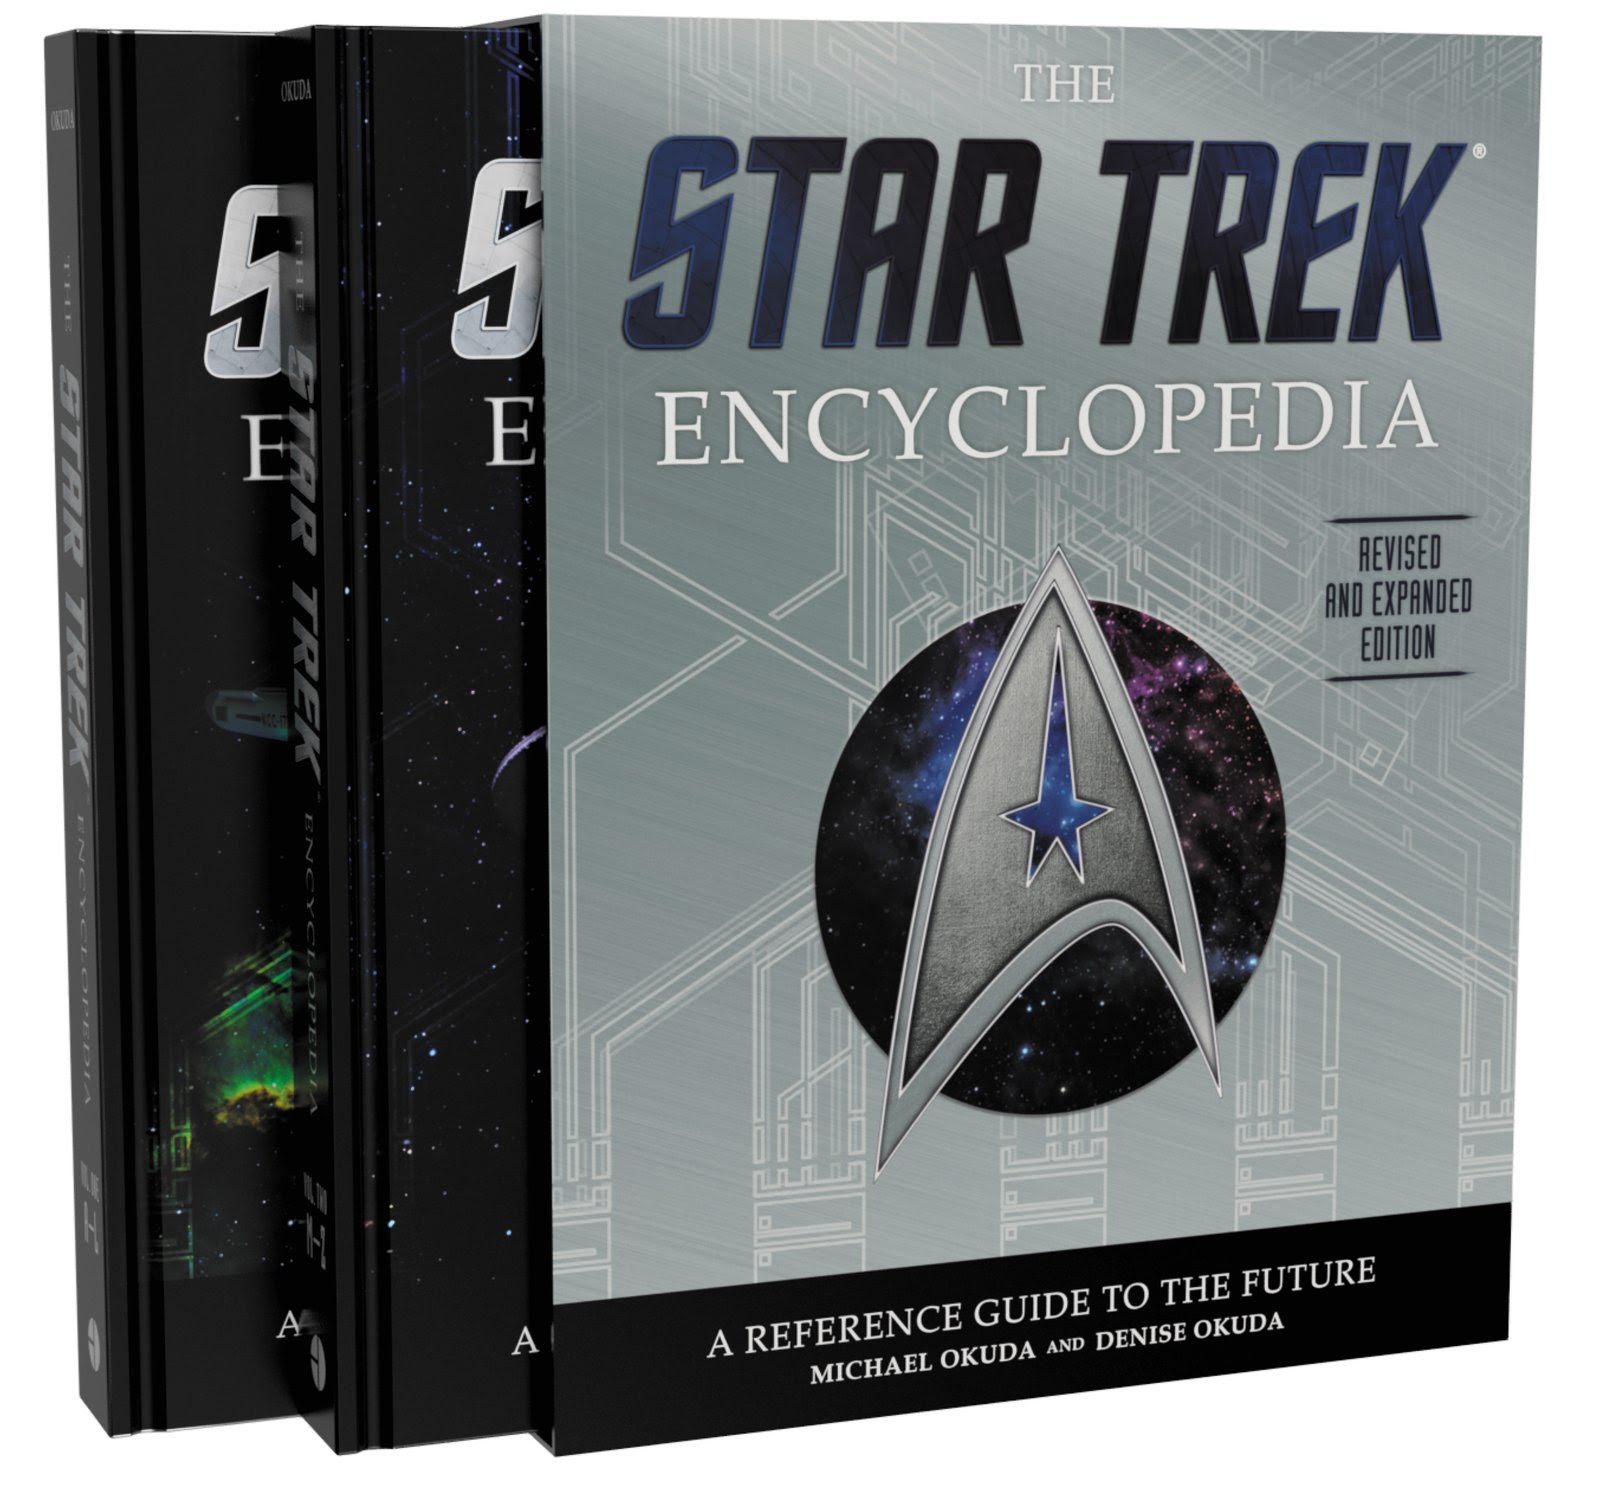 The Trek Collective Star Trek Encyclopedia preview pages